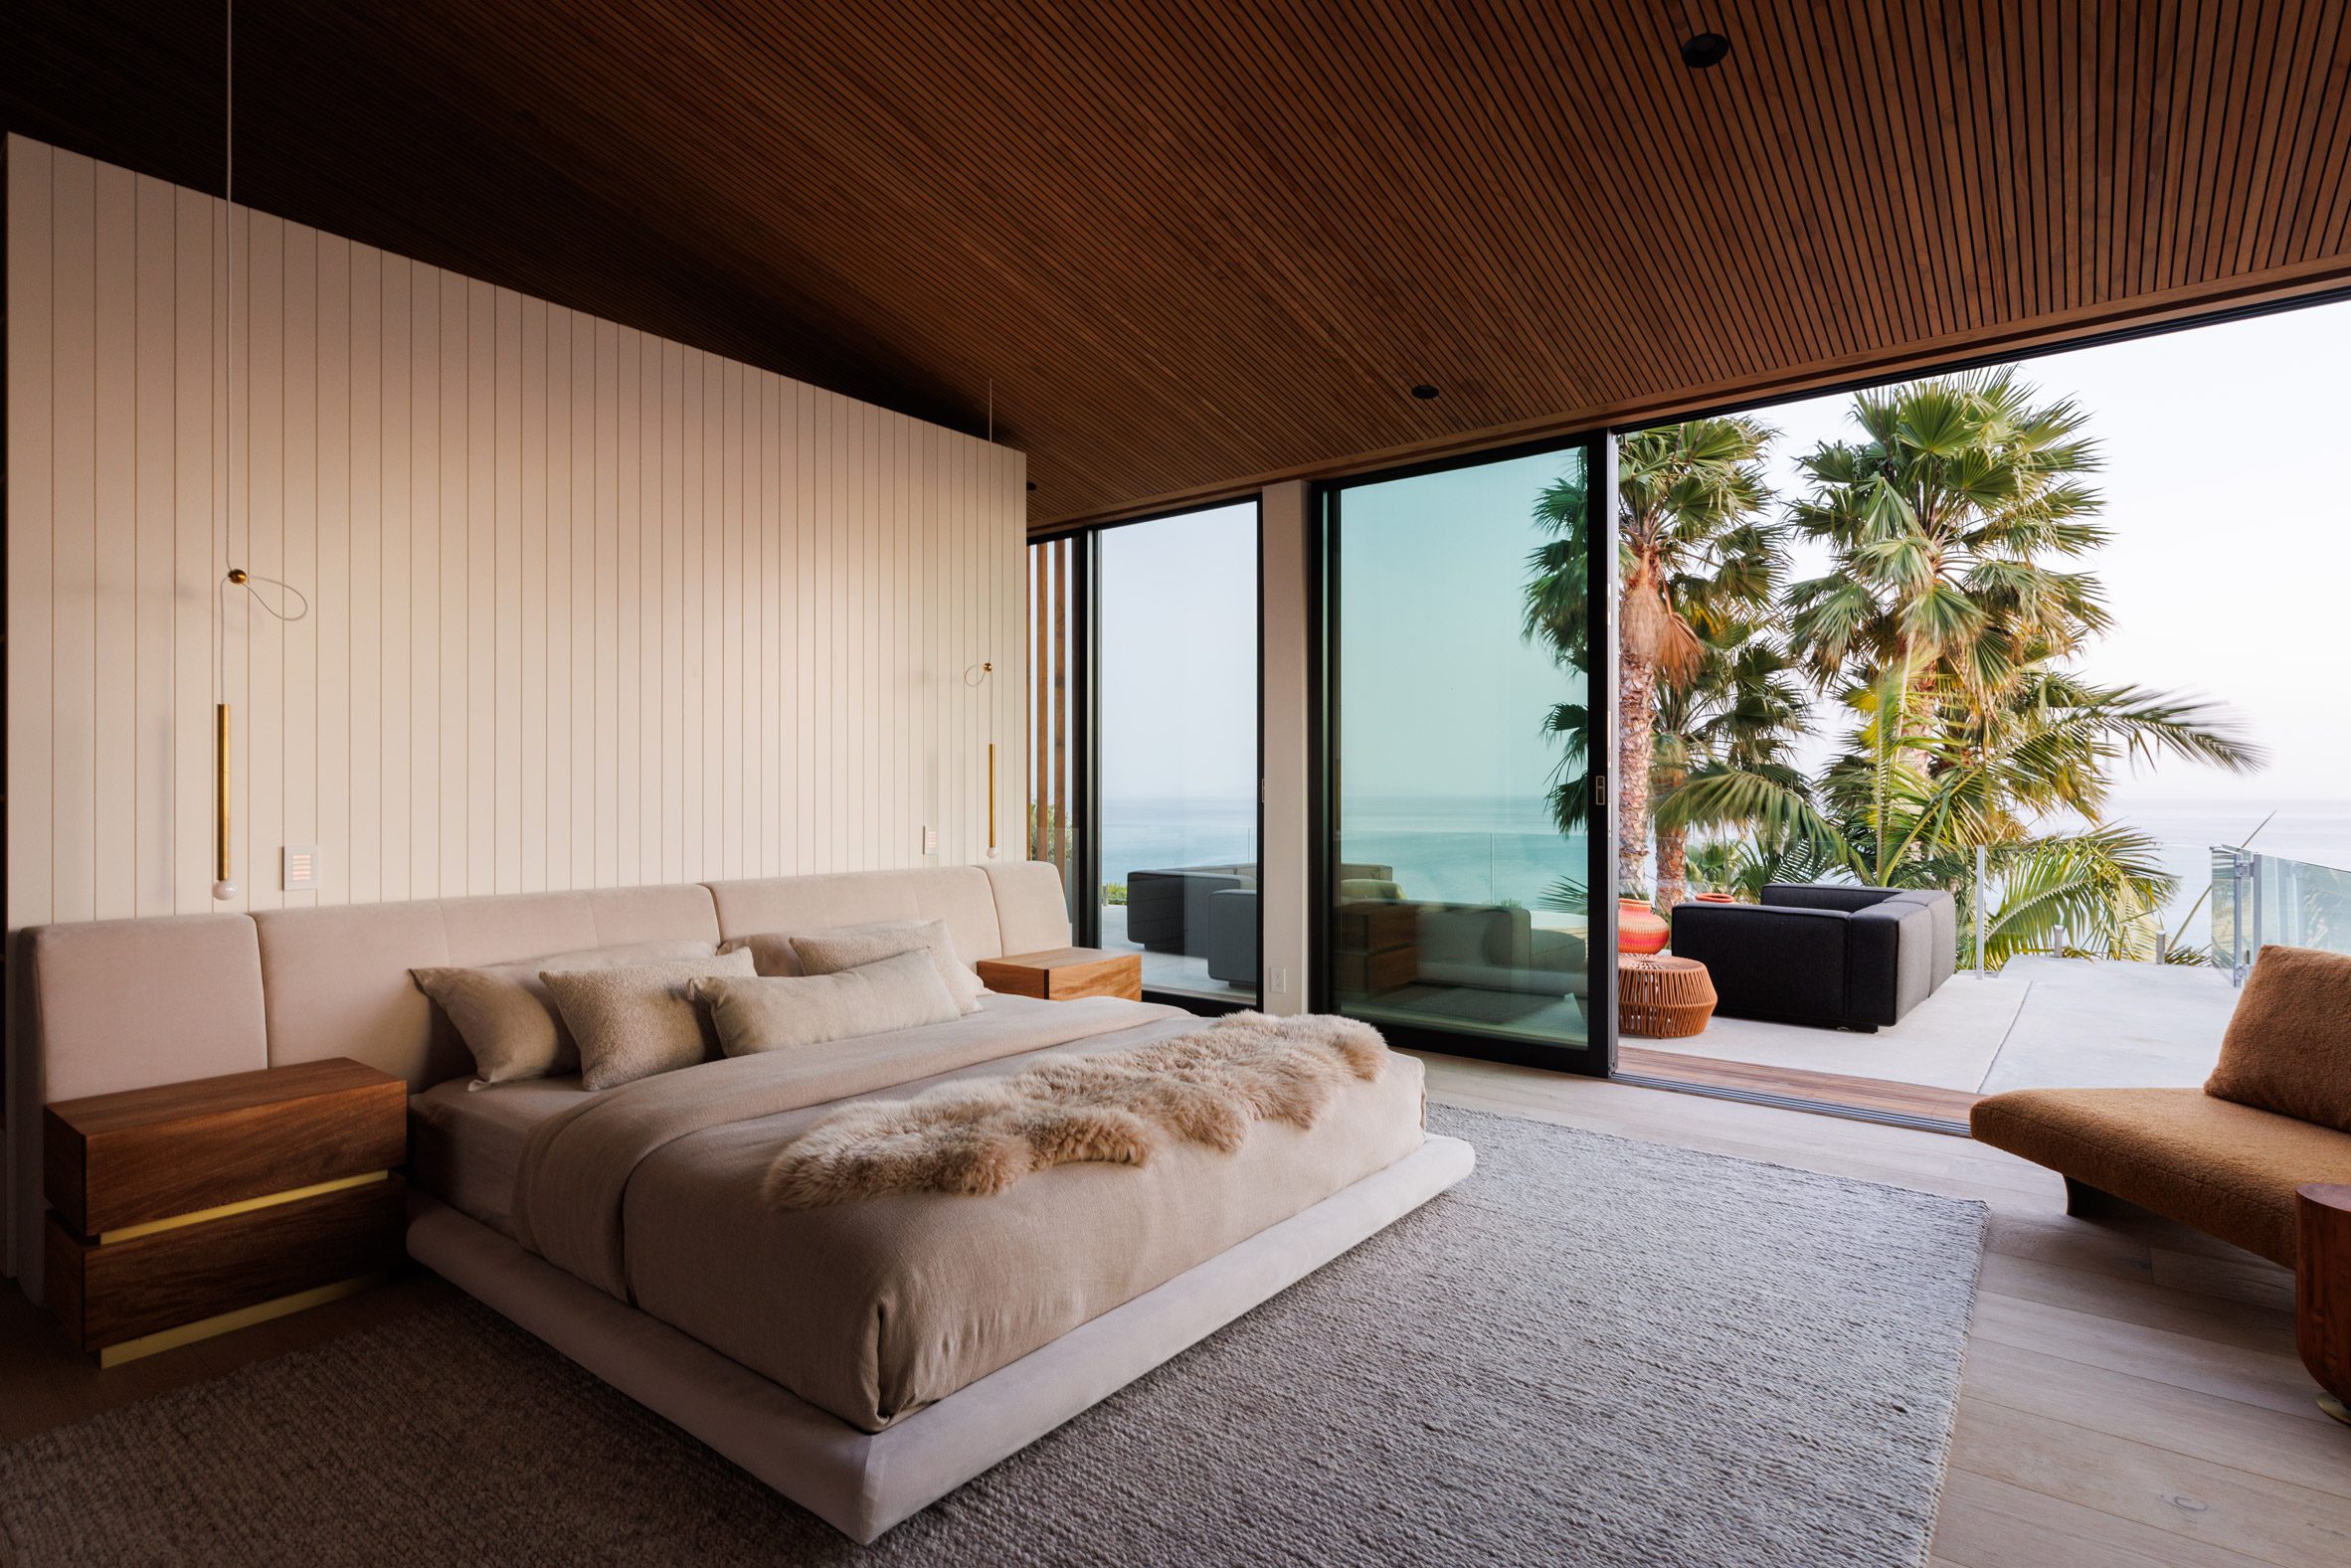 Bedroom with sliding doors that open onto a terrace